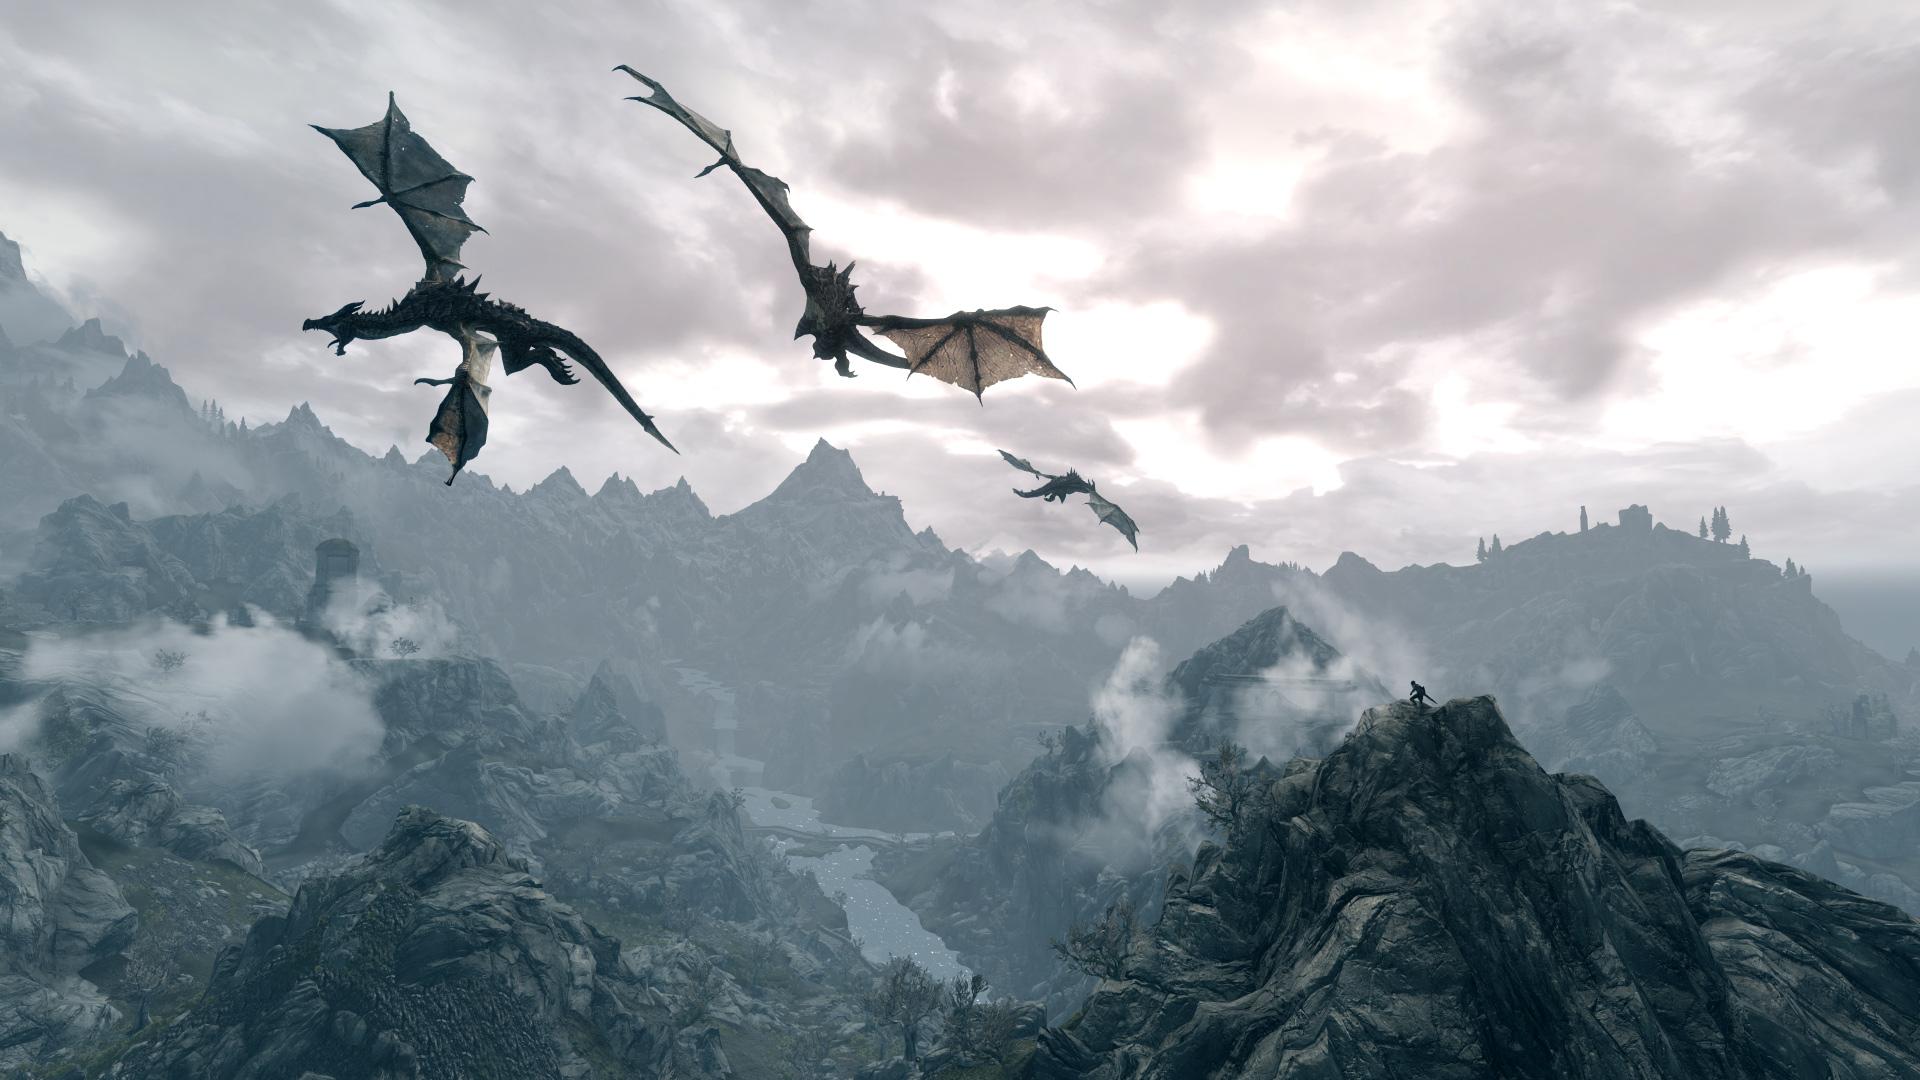 Skyrim Dragon High Quality Wallpaper HD Resolution Car Pictures